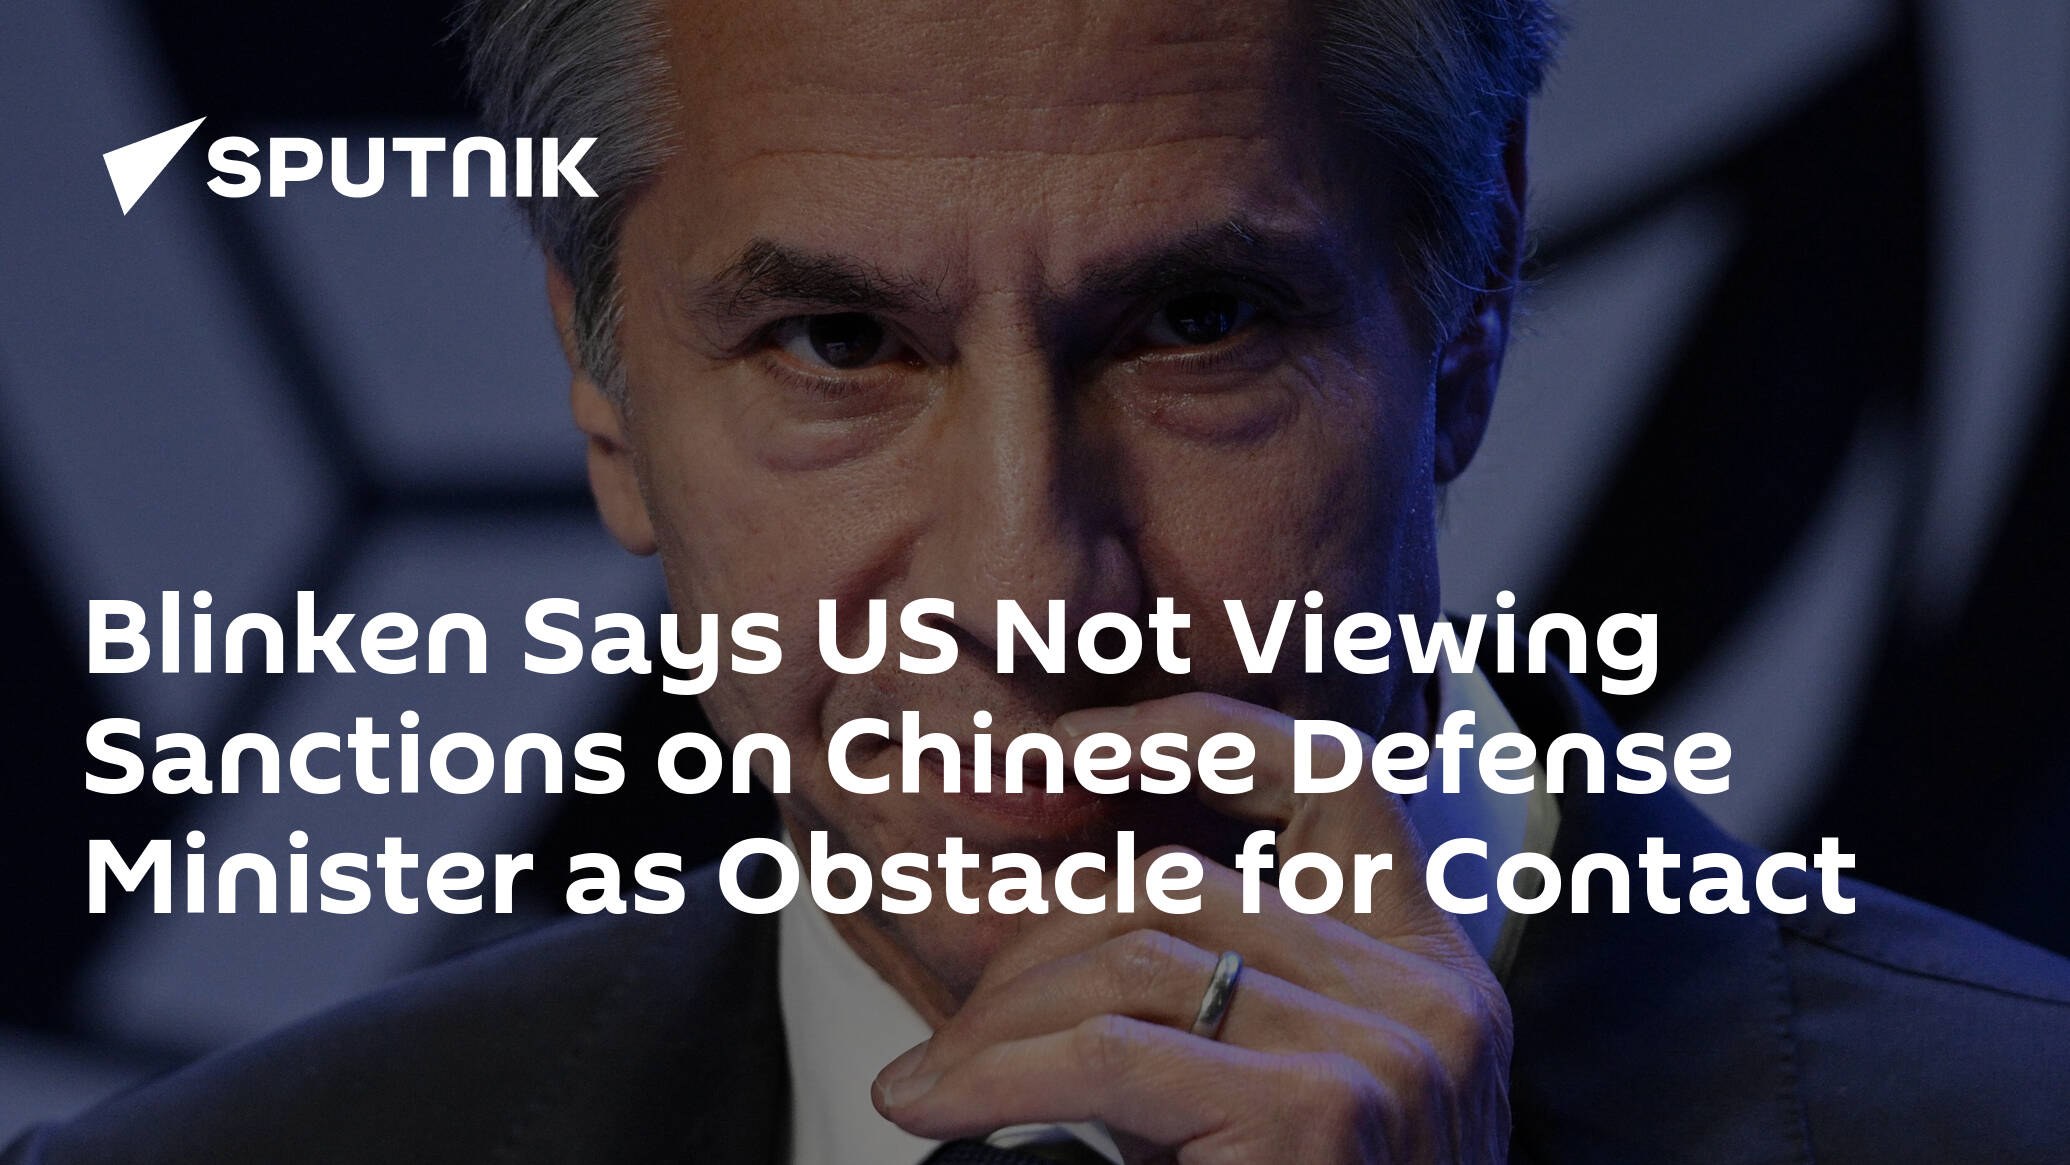 Blinken Says US Not Viewing Sanctions on Chinese Defense Minister as Obstacle for Contact